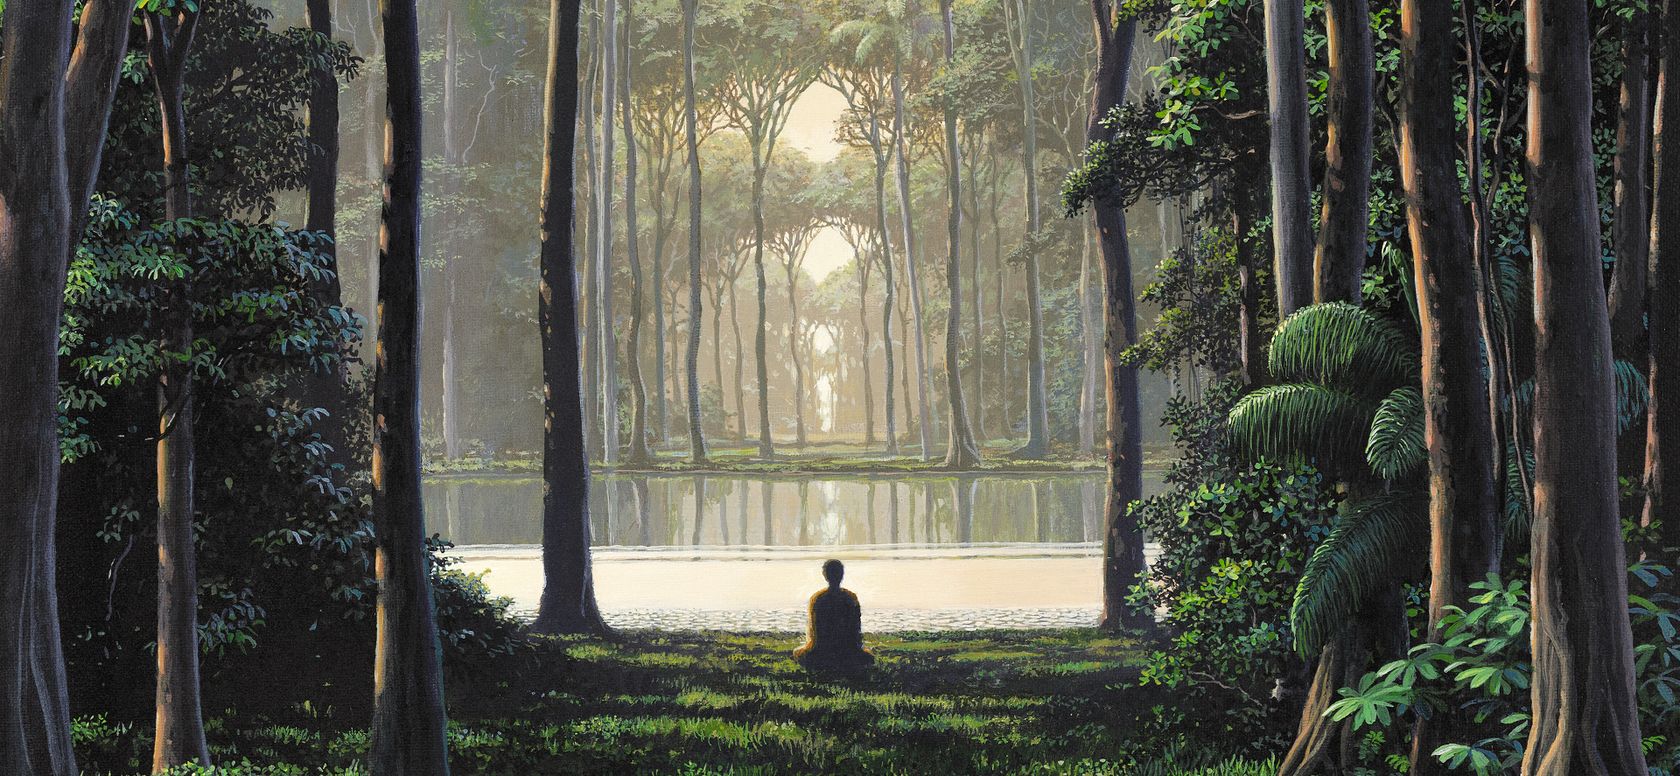 symmetrical composition showing a seated, meditating figure dwarfed by a verdant rainforest